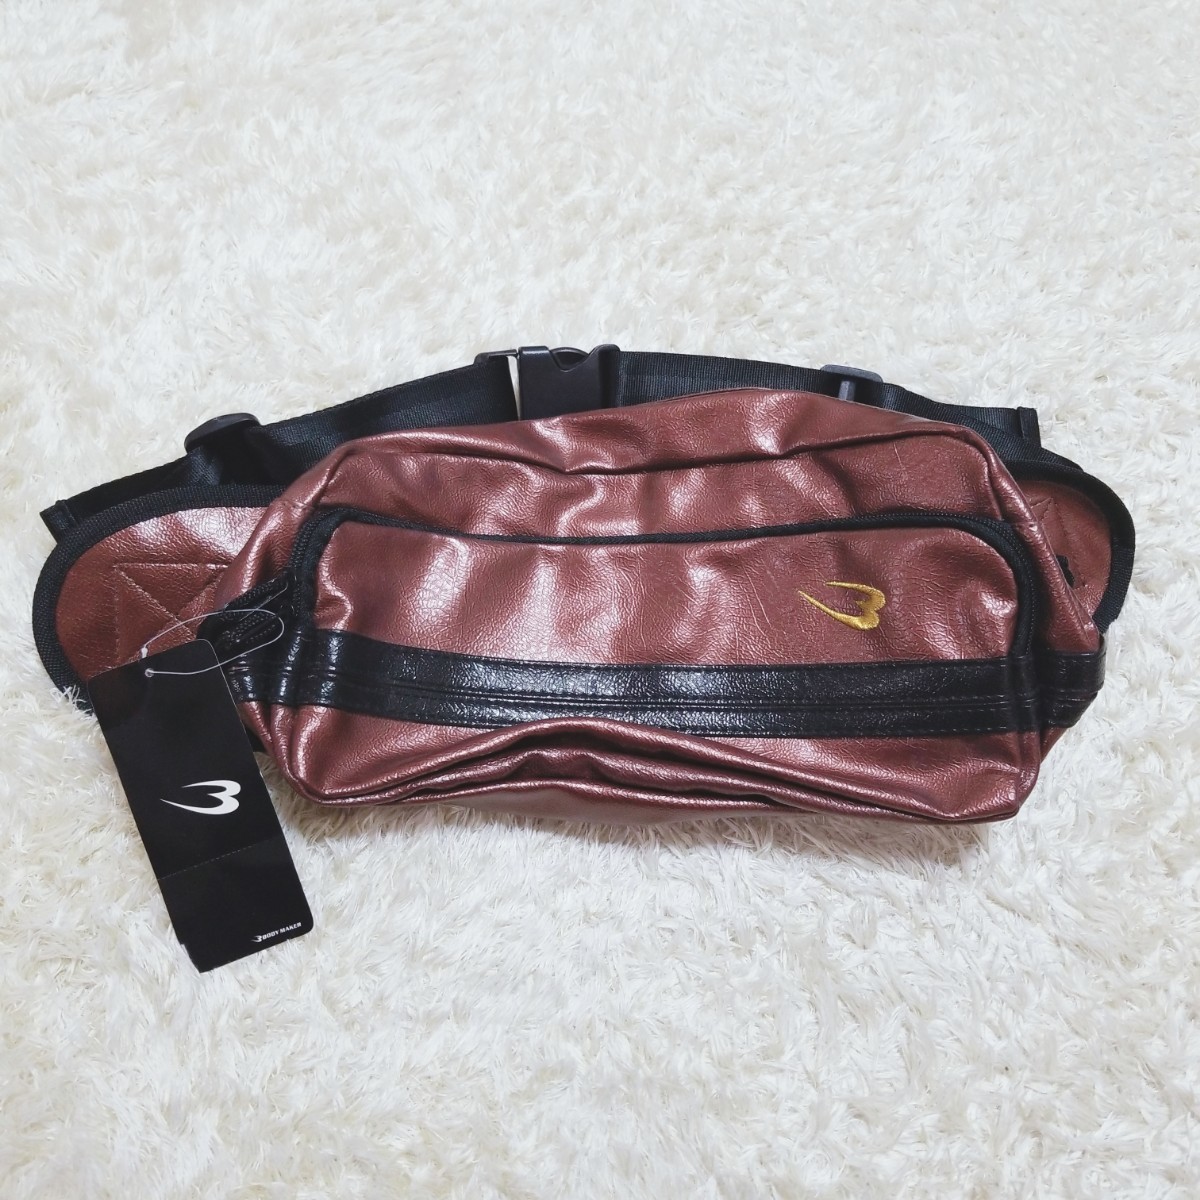  free shipping *Y1180 new goods * tag attaching *BODYMAKER body Manufacturers 2way body bag belt bag metallic brown group unisex 